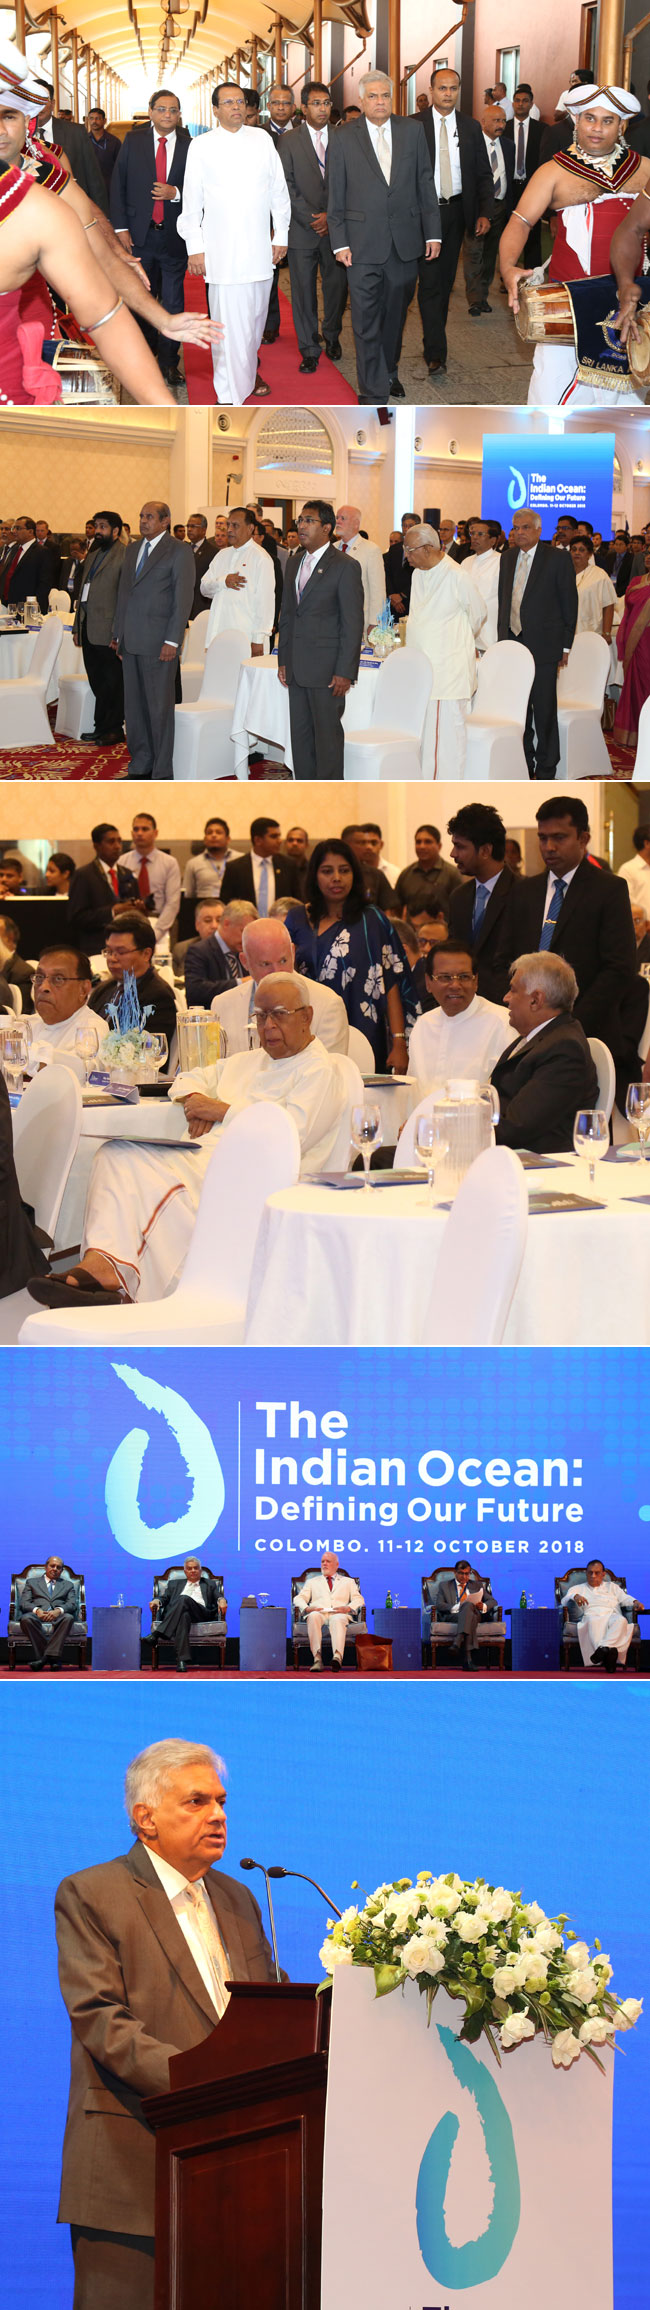 The Indian Ocean: Defining our Future...